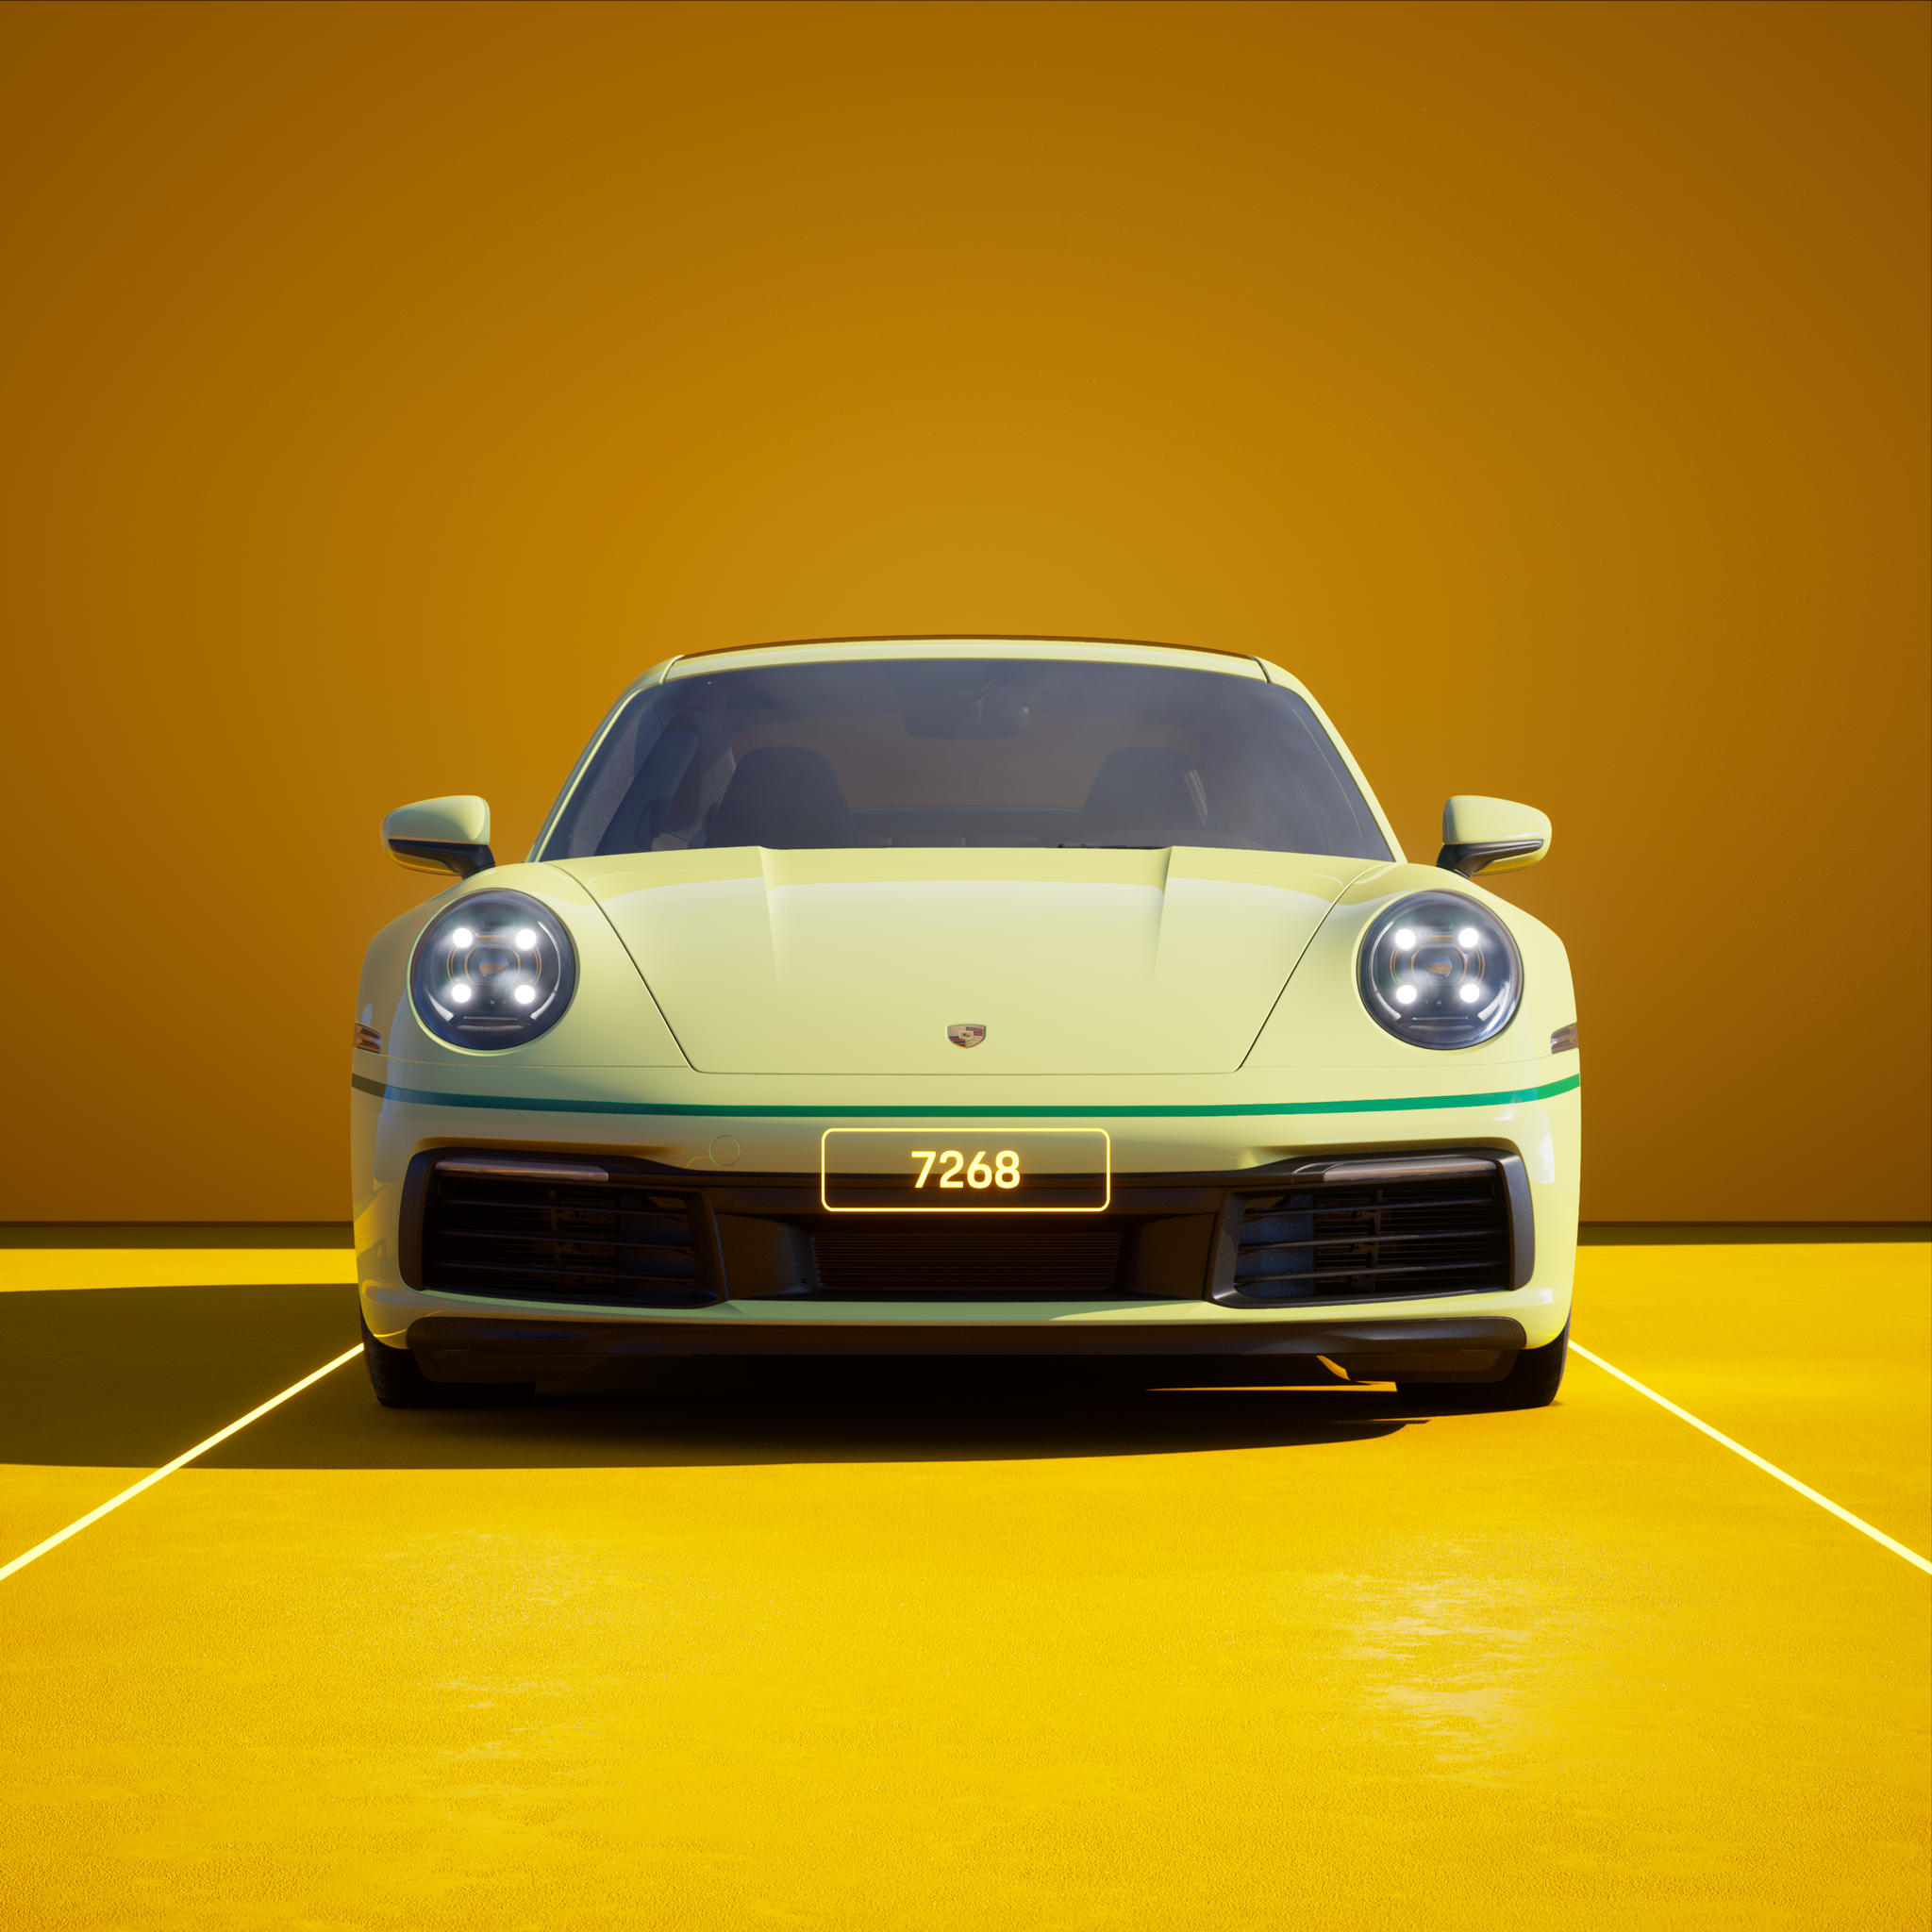 The PORSCHΞ 911 7268 image in phase